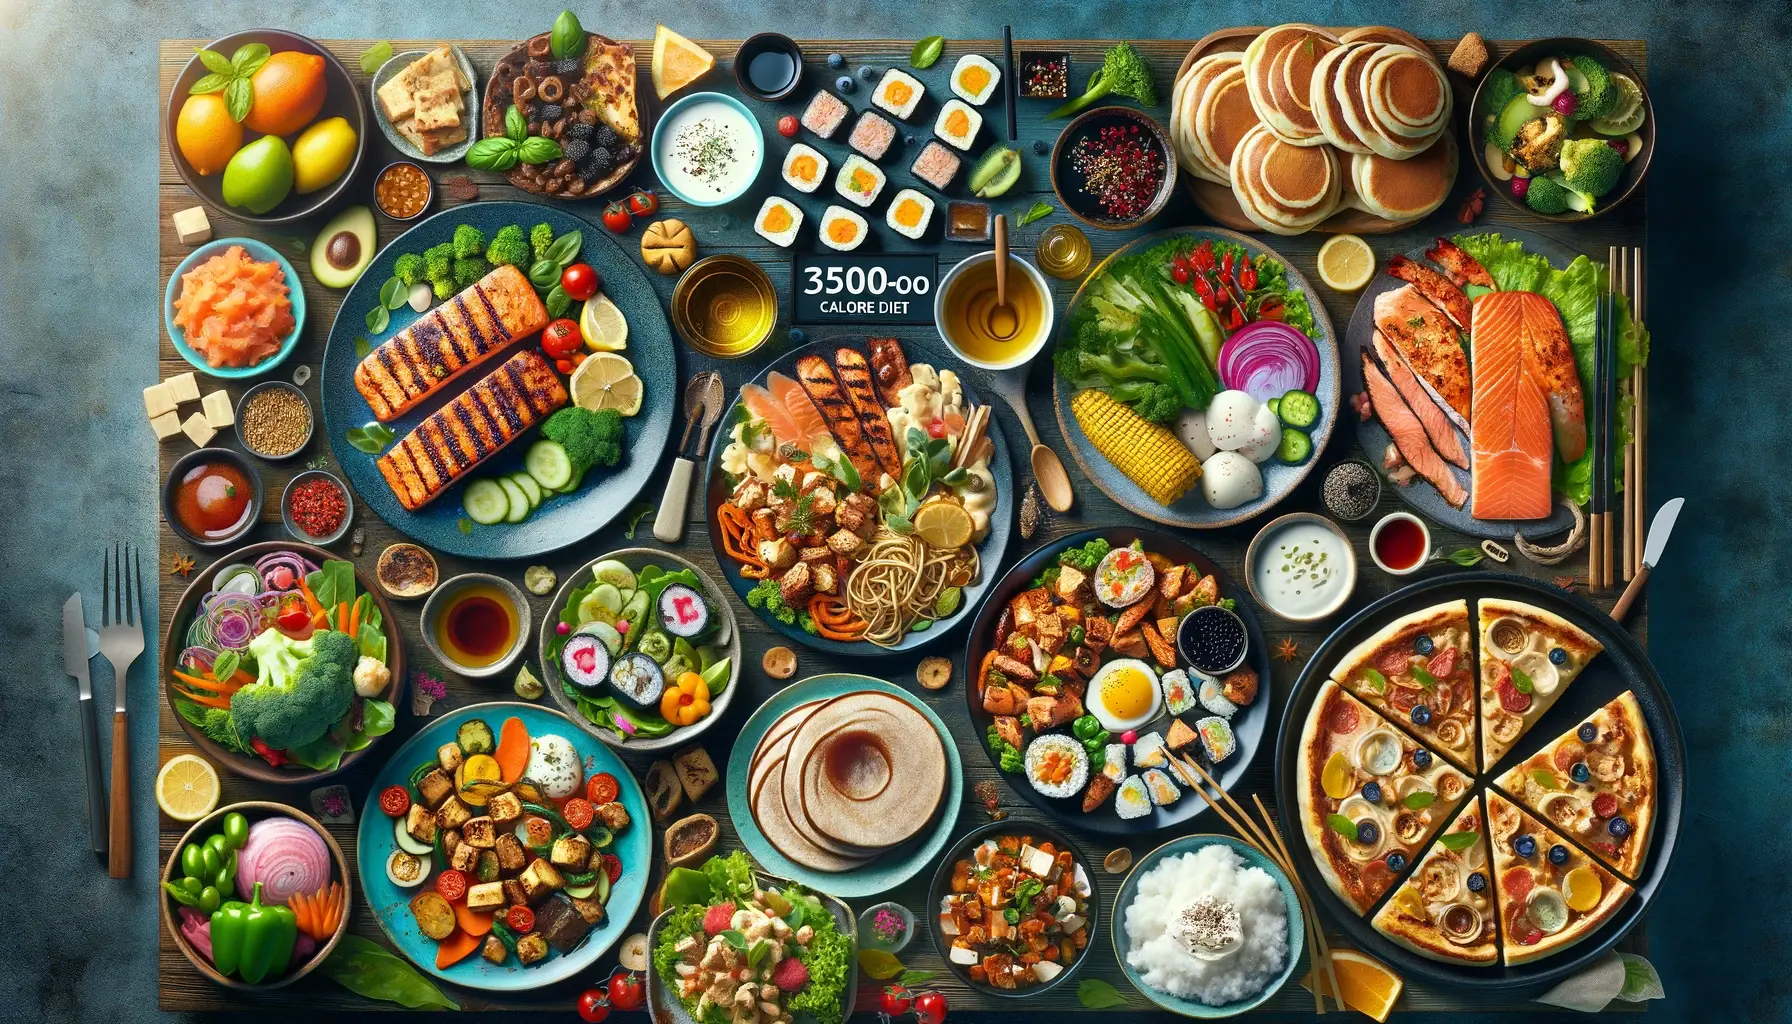 A visually stunning and appealing image showcasing a variety of meals suitable for a 3500-calorie diet, presented in an attractive and engaging manner